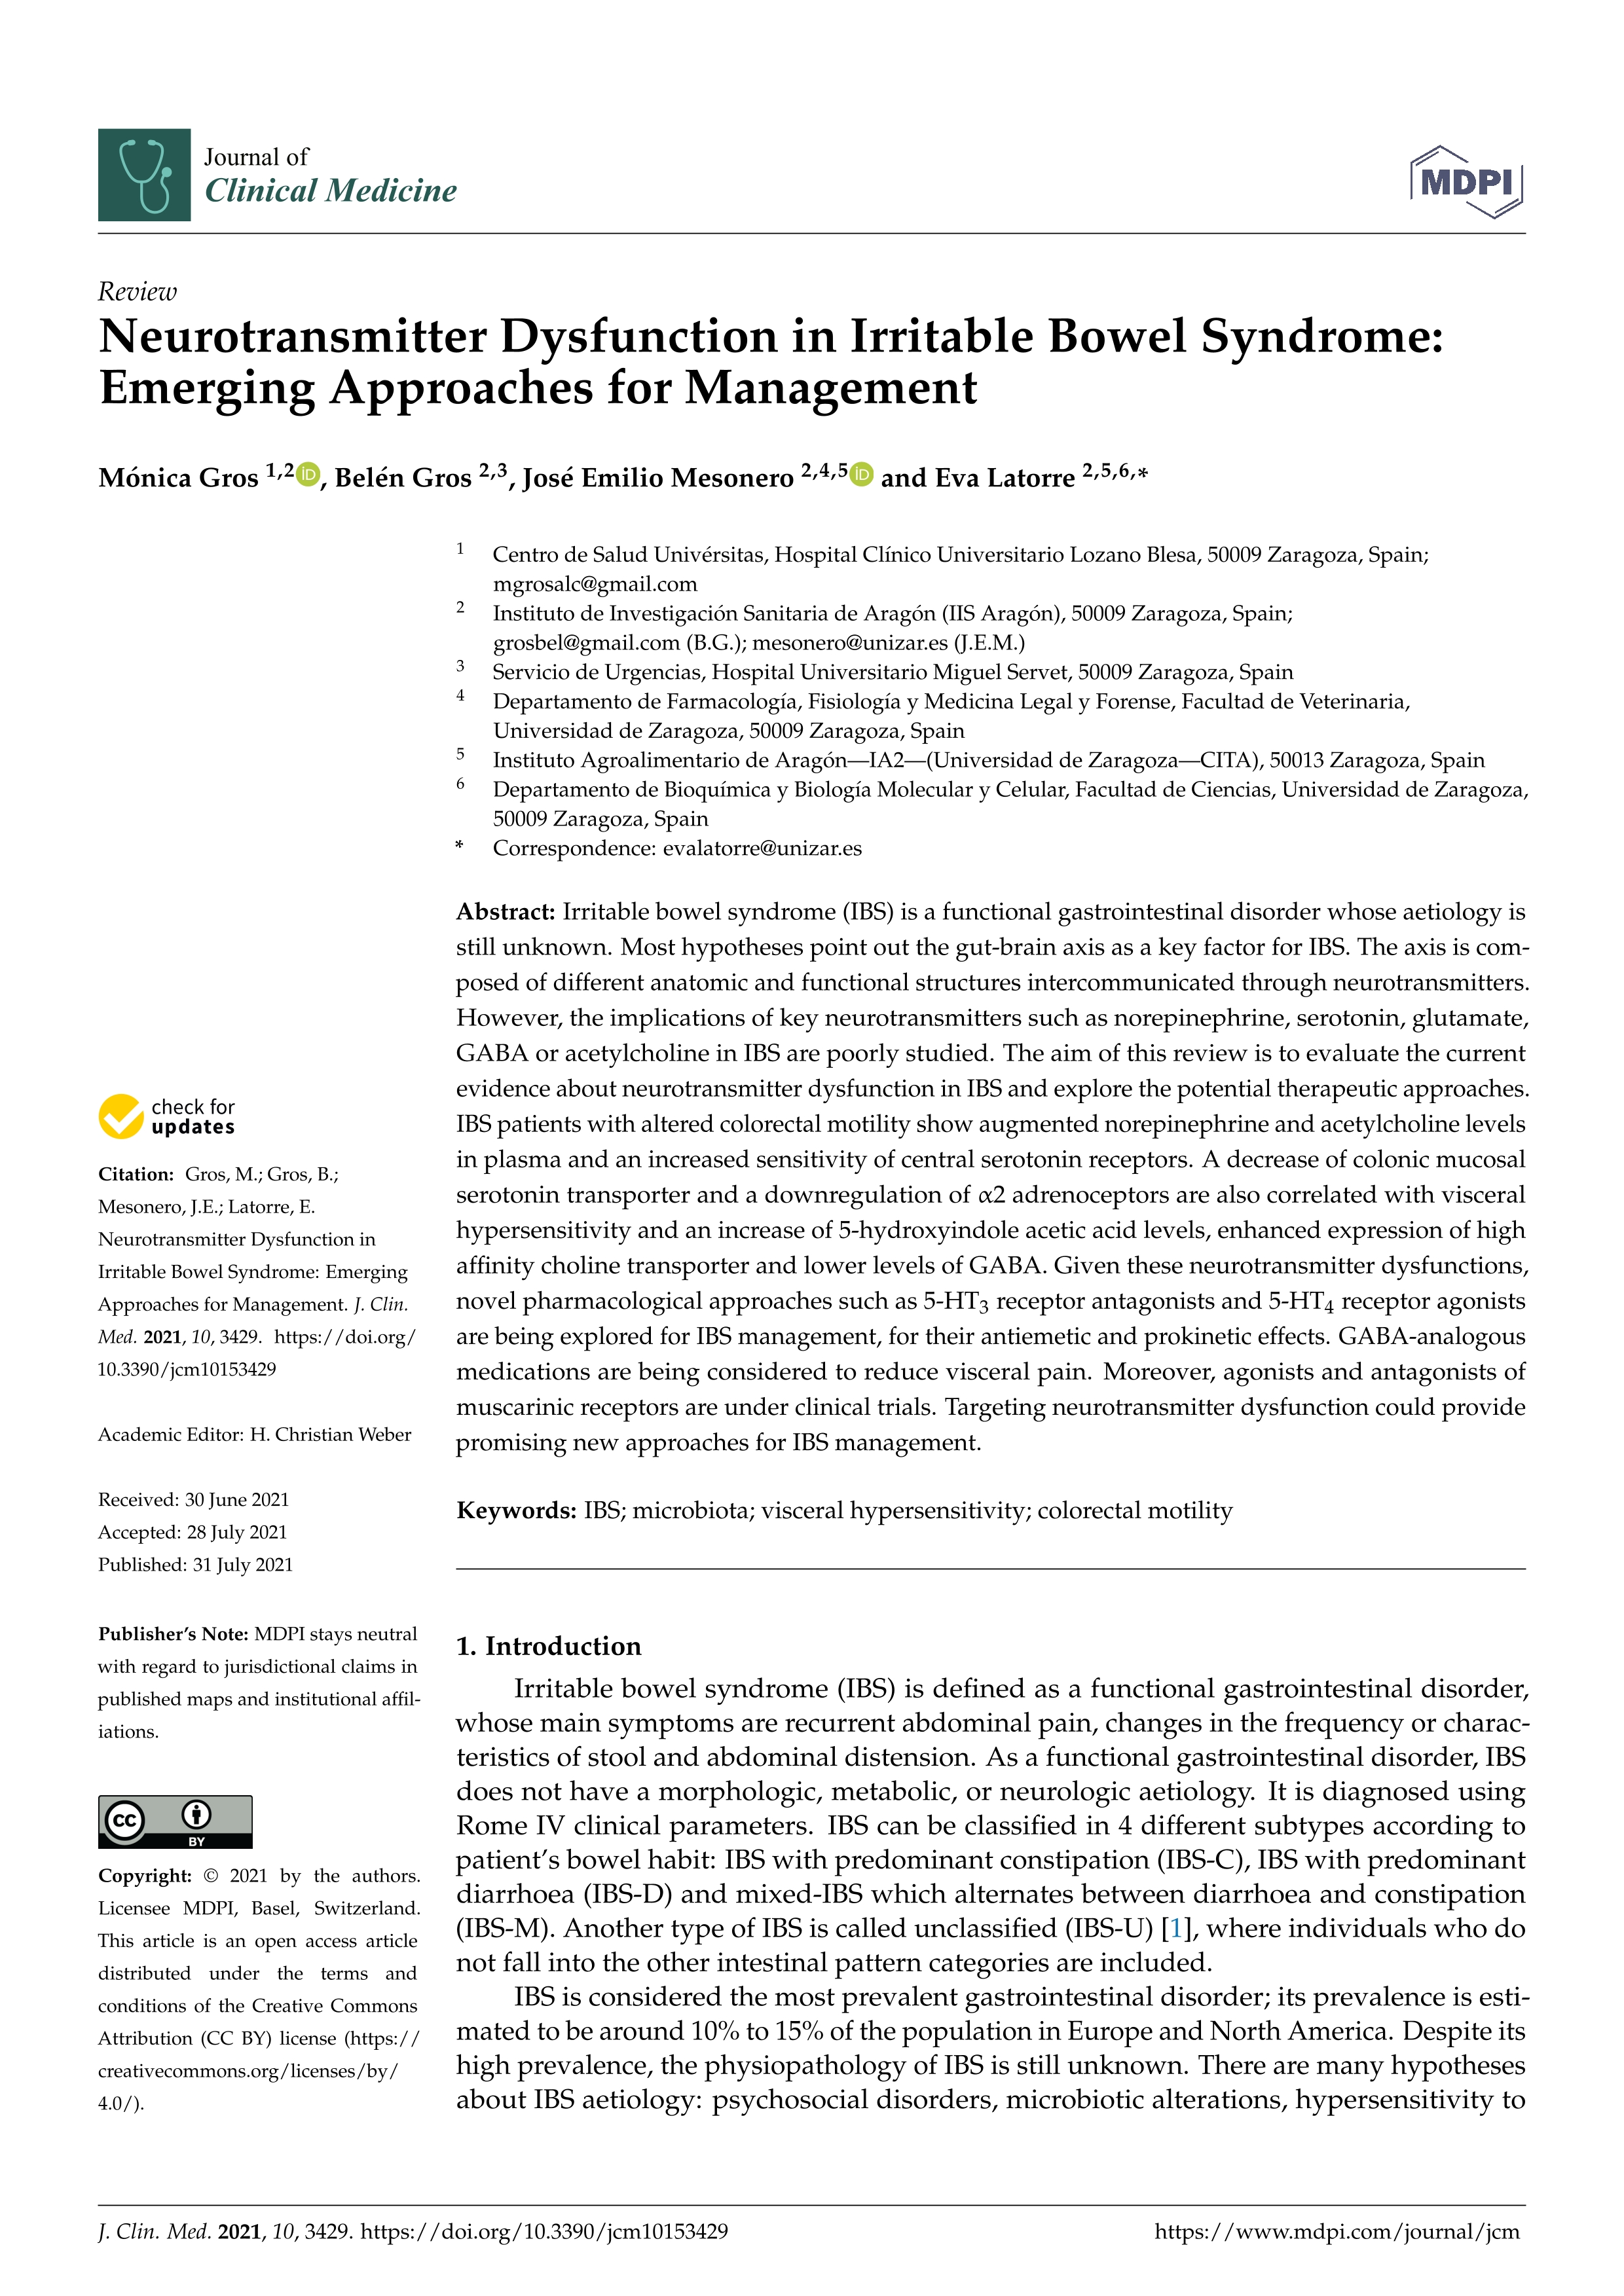 Neurotransmitter Dysfunction in Irritable Bowel Syndrome: Emerging Approaches for Management